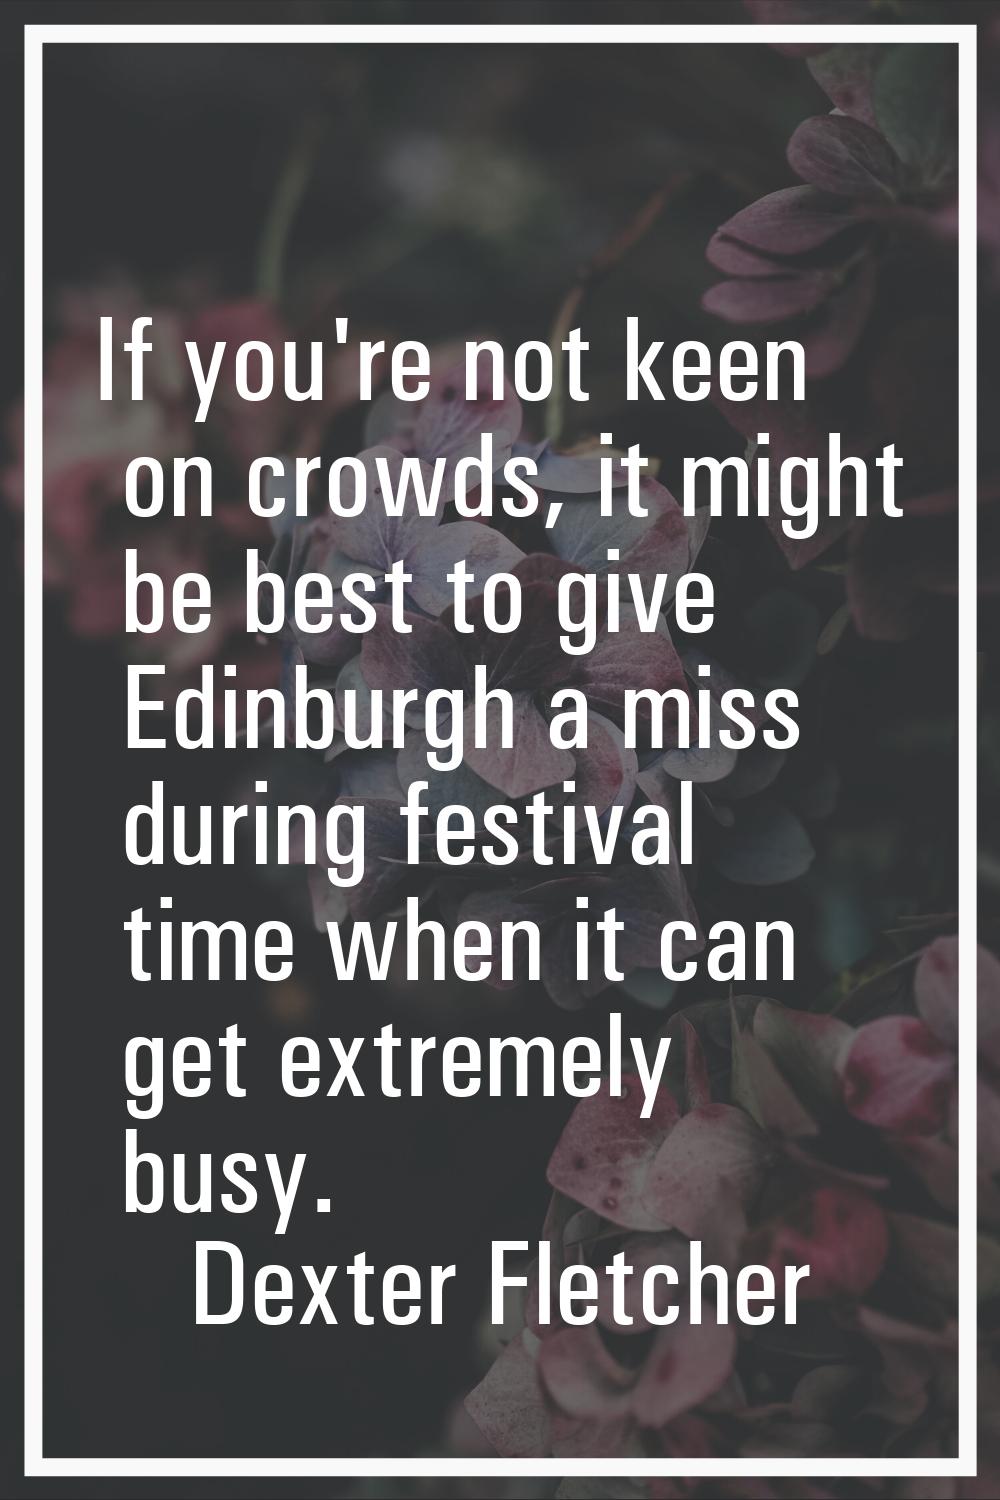 If you're not keen on crowds, it might be best to give Edinburgh a miss during festival time when i